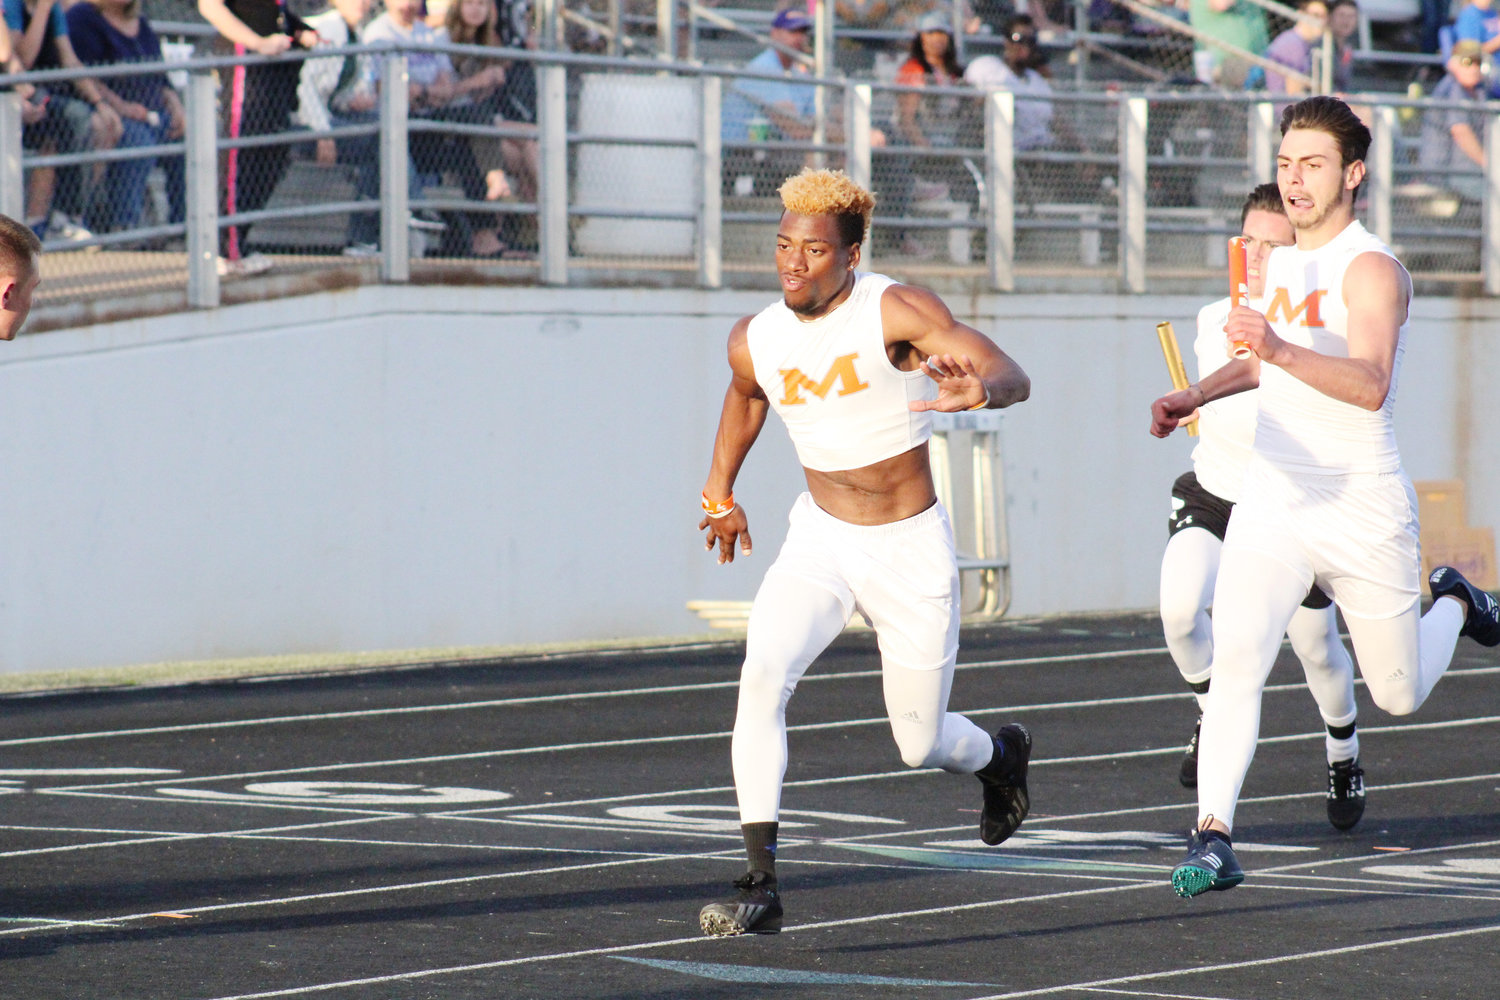 Dalton Harris hands off to the baton to Kartney Hampton in the men’s 4x200 varsity relay. The Mineola relay team finished 2nd place in the event but set a new school record with a time of 1:30:65. (Monitor photo by Briana Harmon)